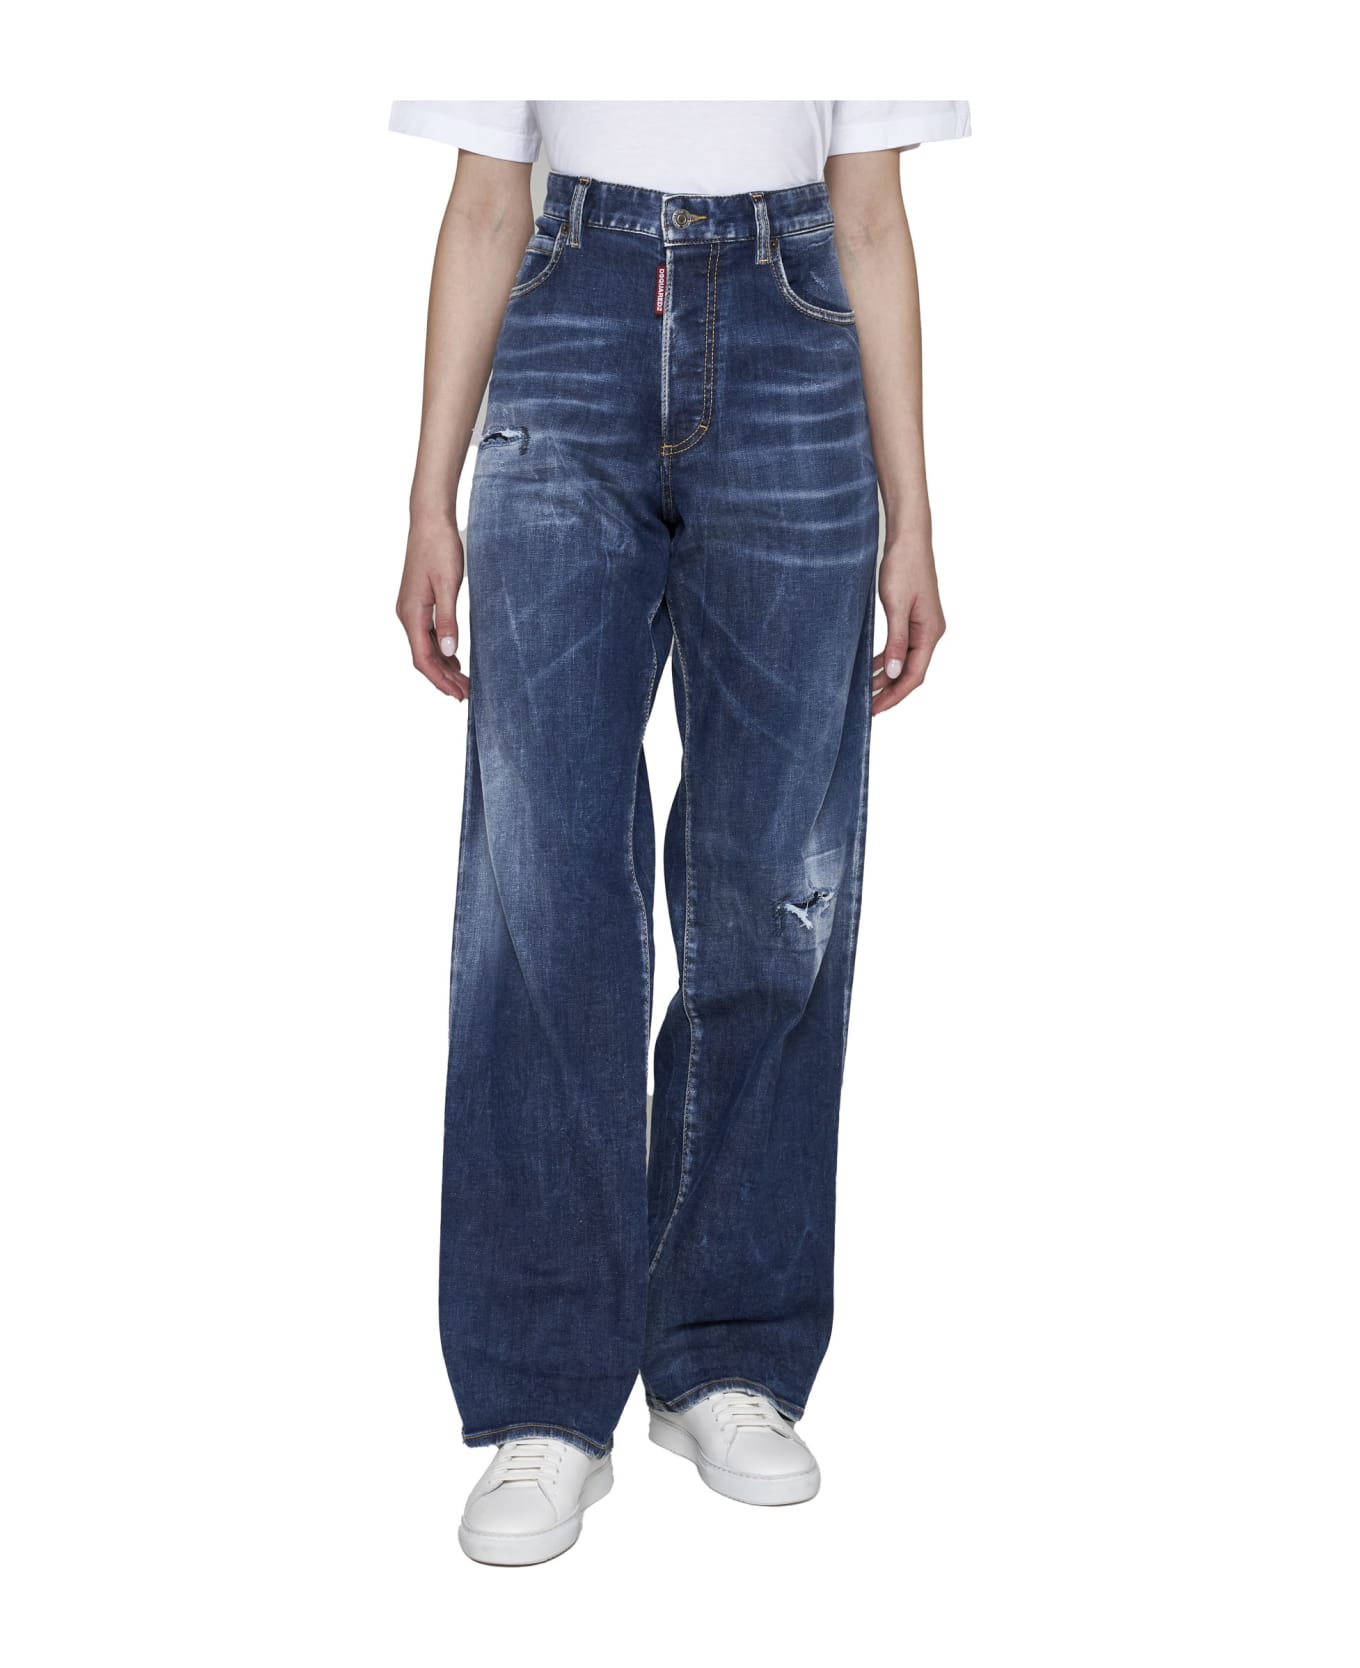 Dsquared2 Icon San Diego Jeans - Navy blue